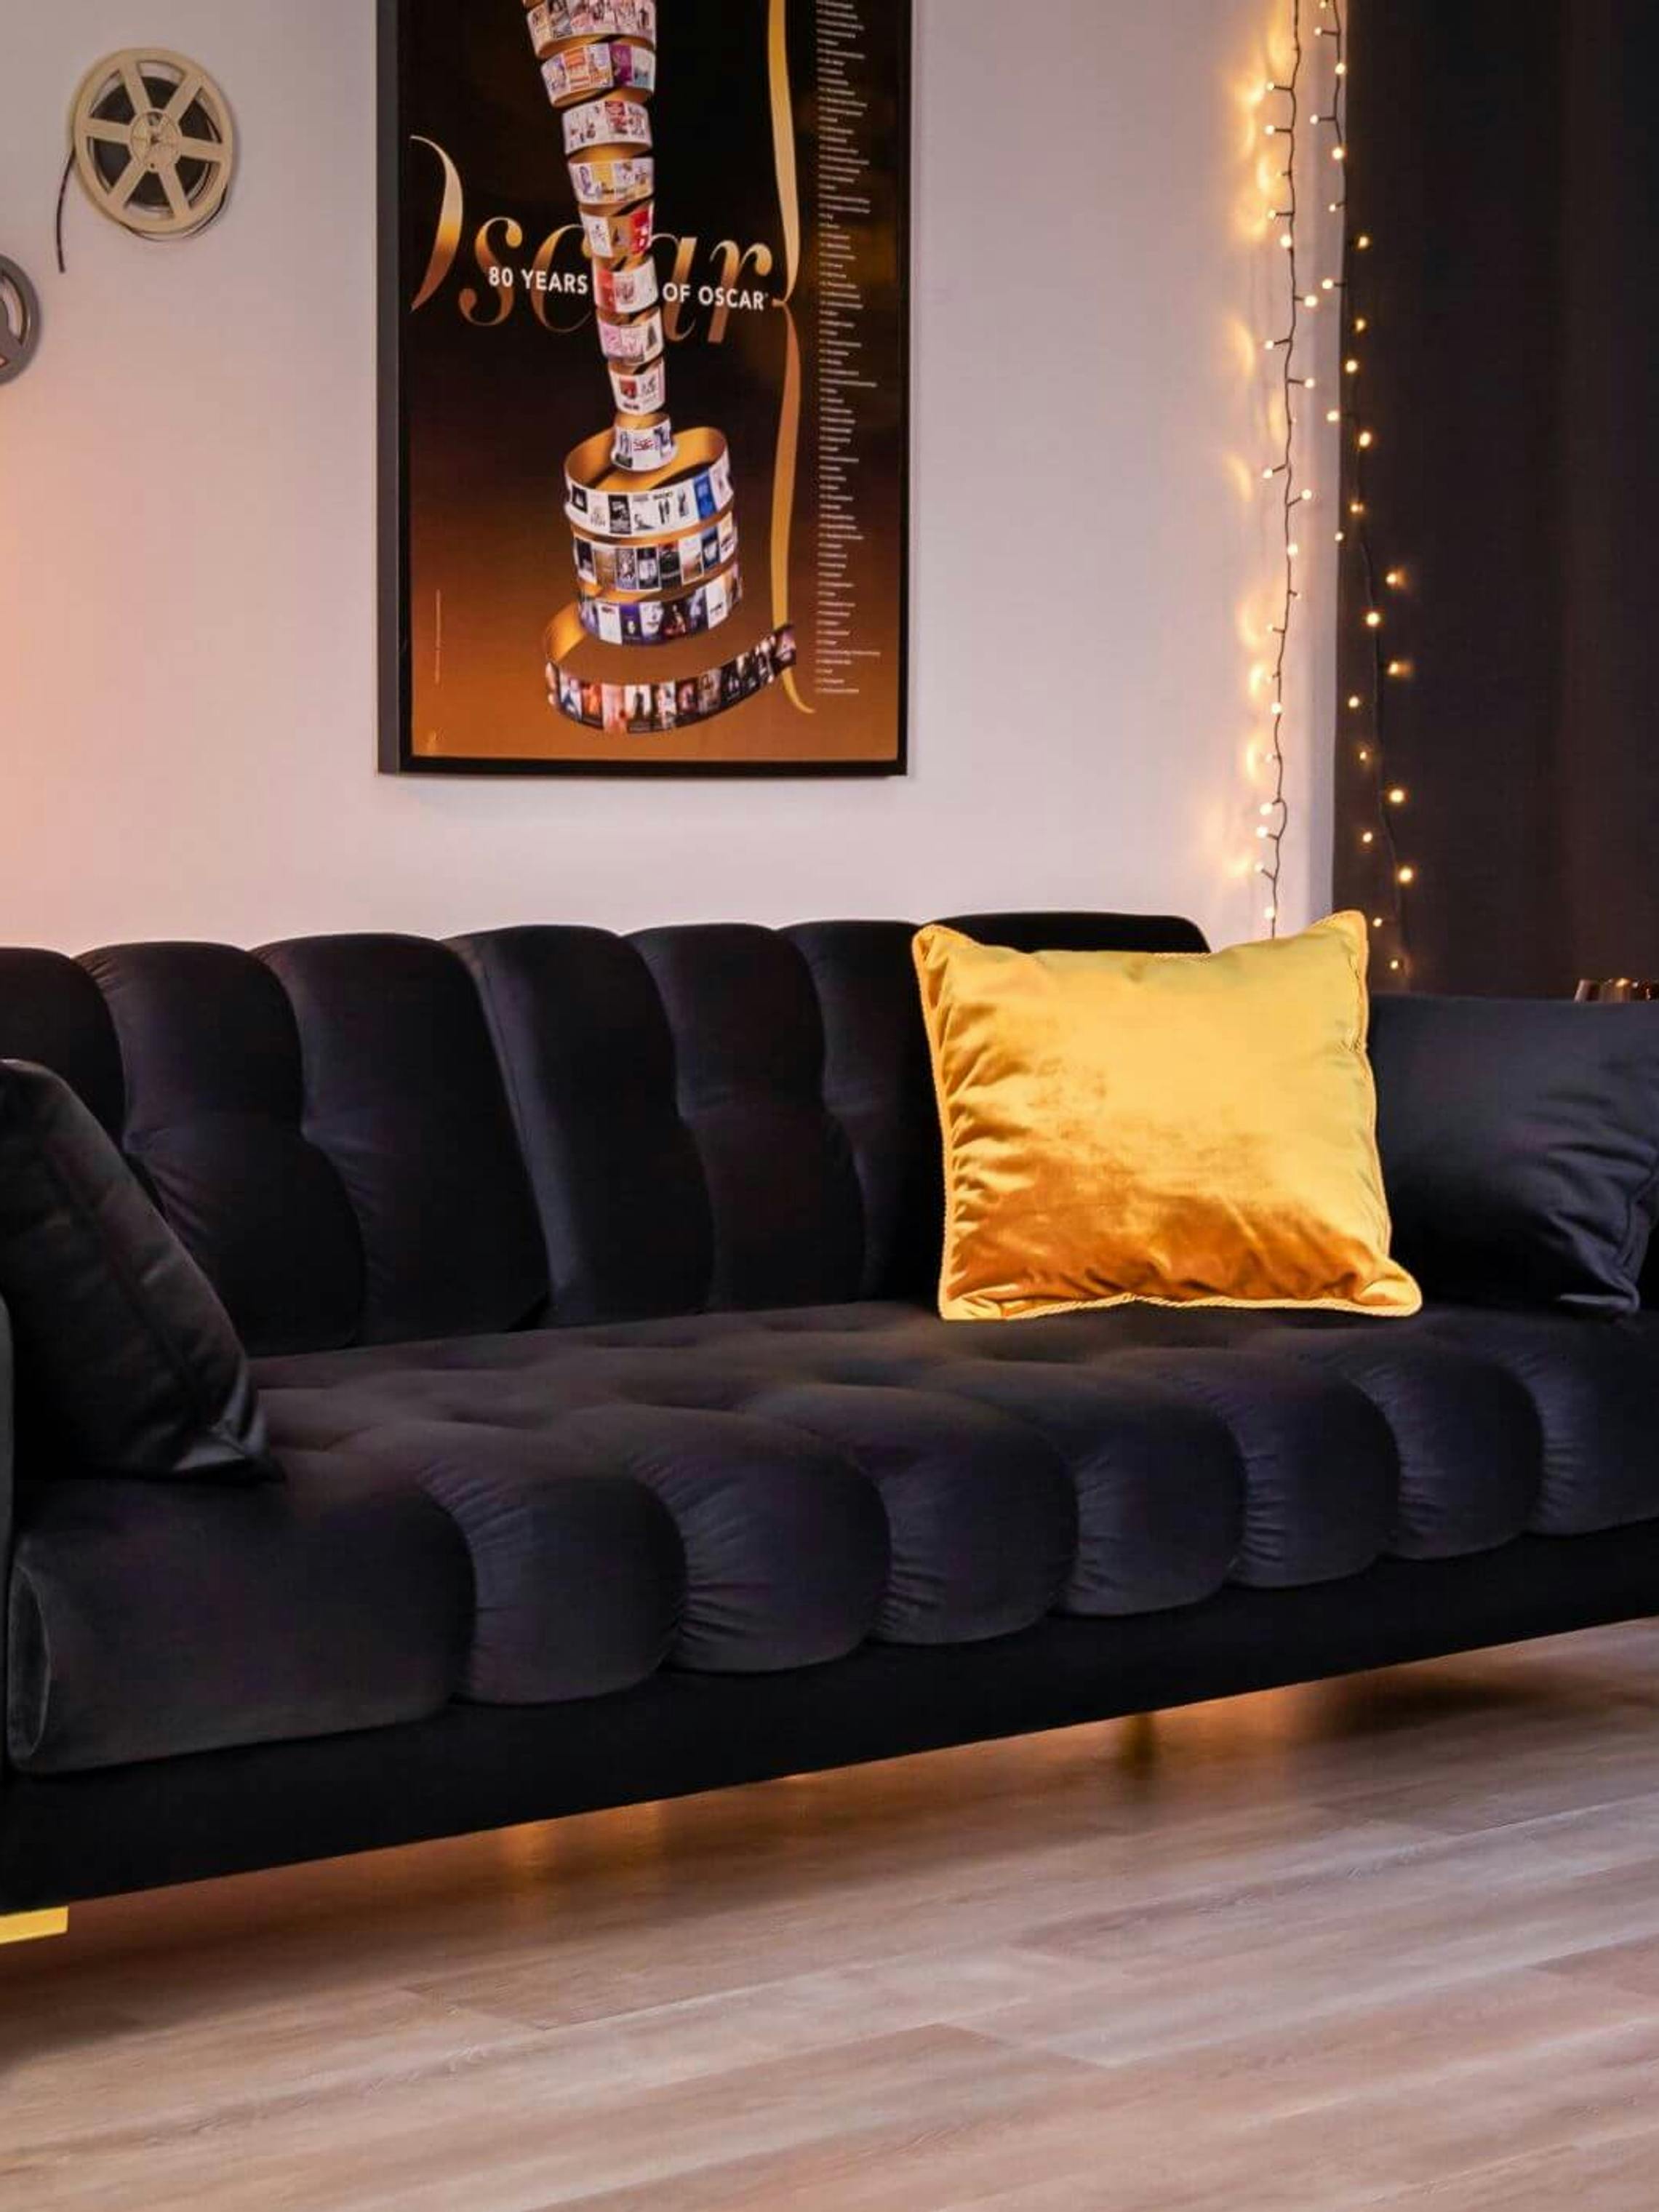 Black-sofa-decorated-in-a-room-with-movie-theme